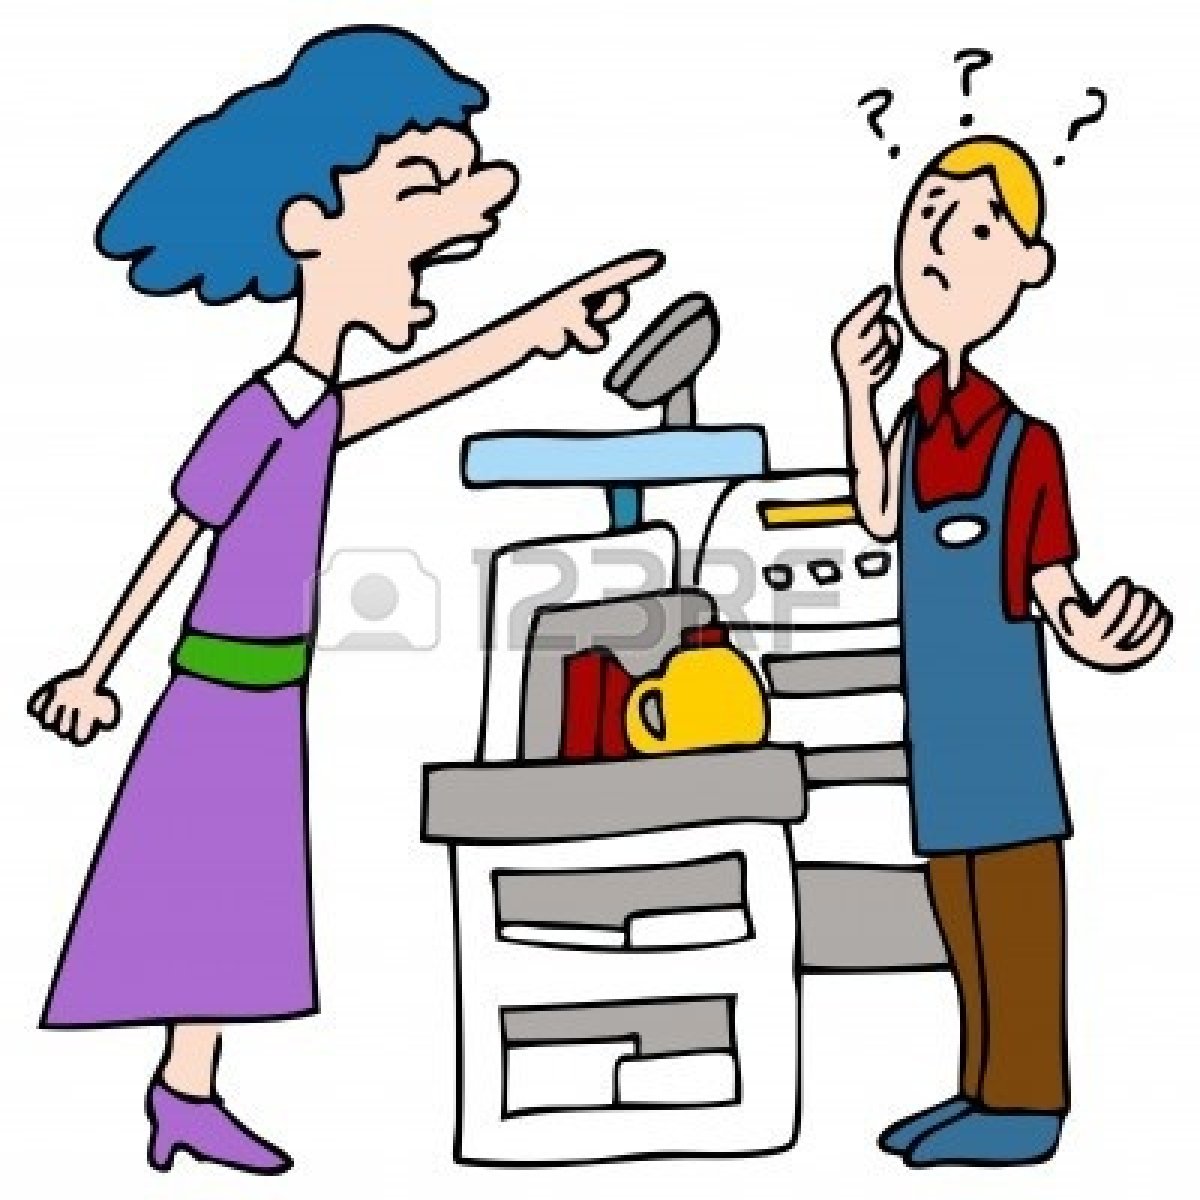 Unhappy family clipart 8 » Clipart Station.